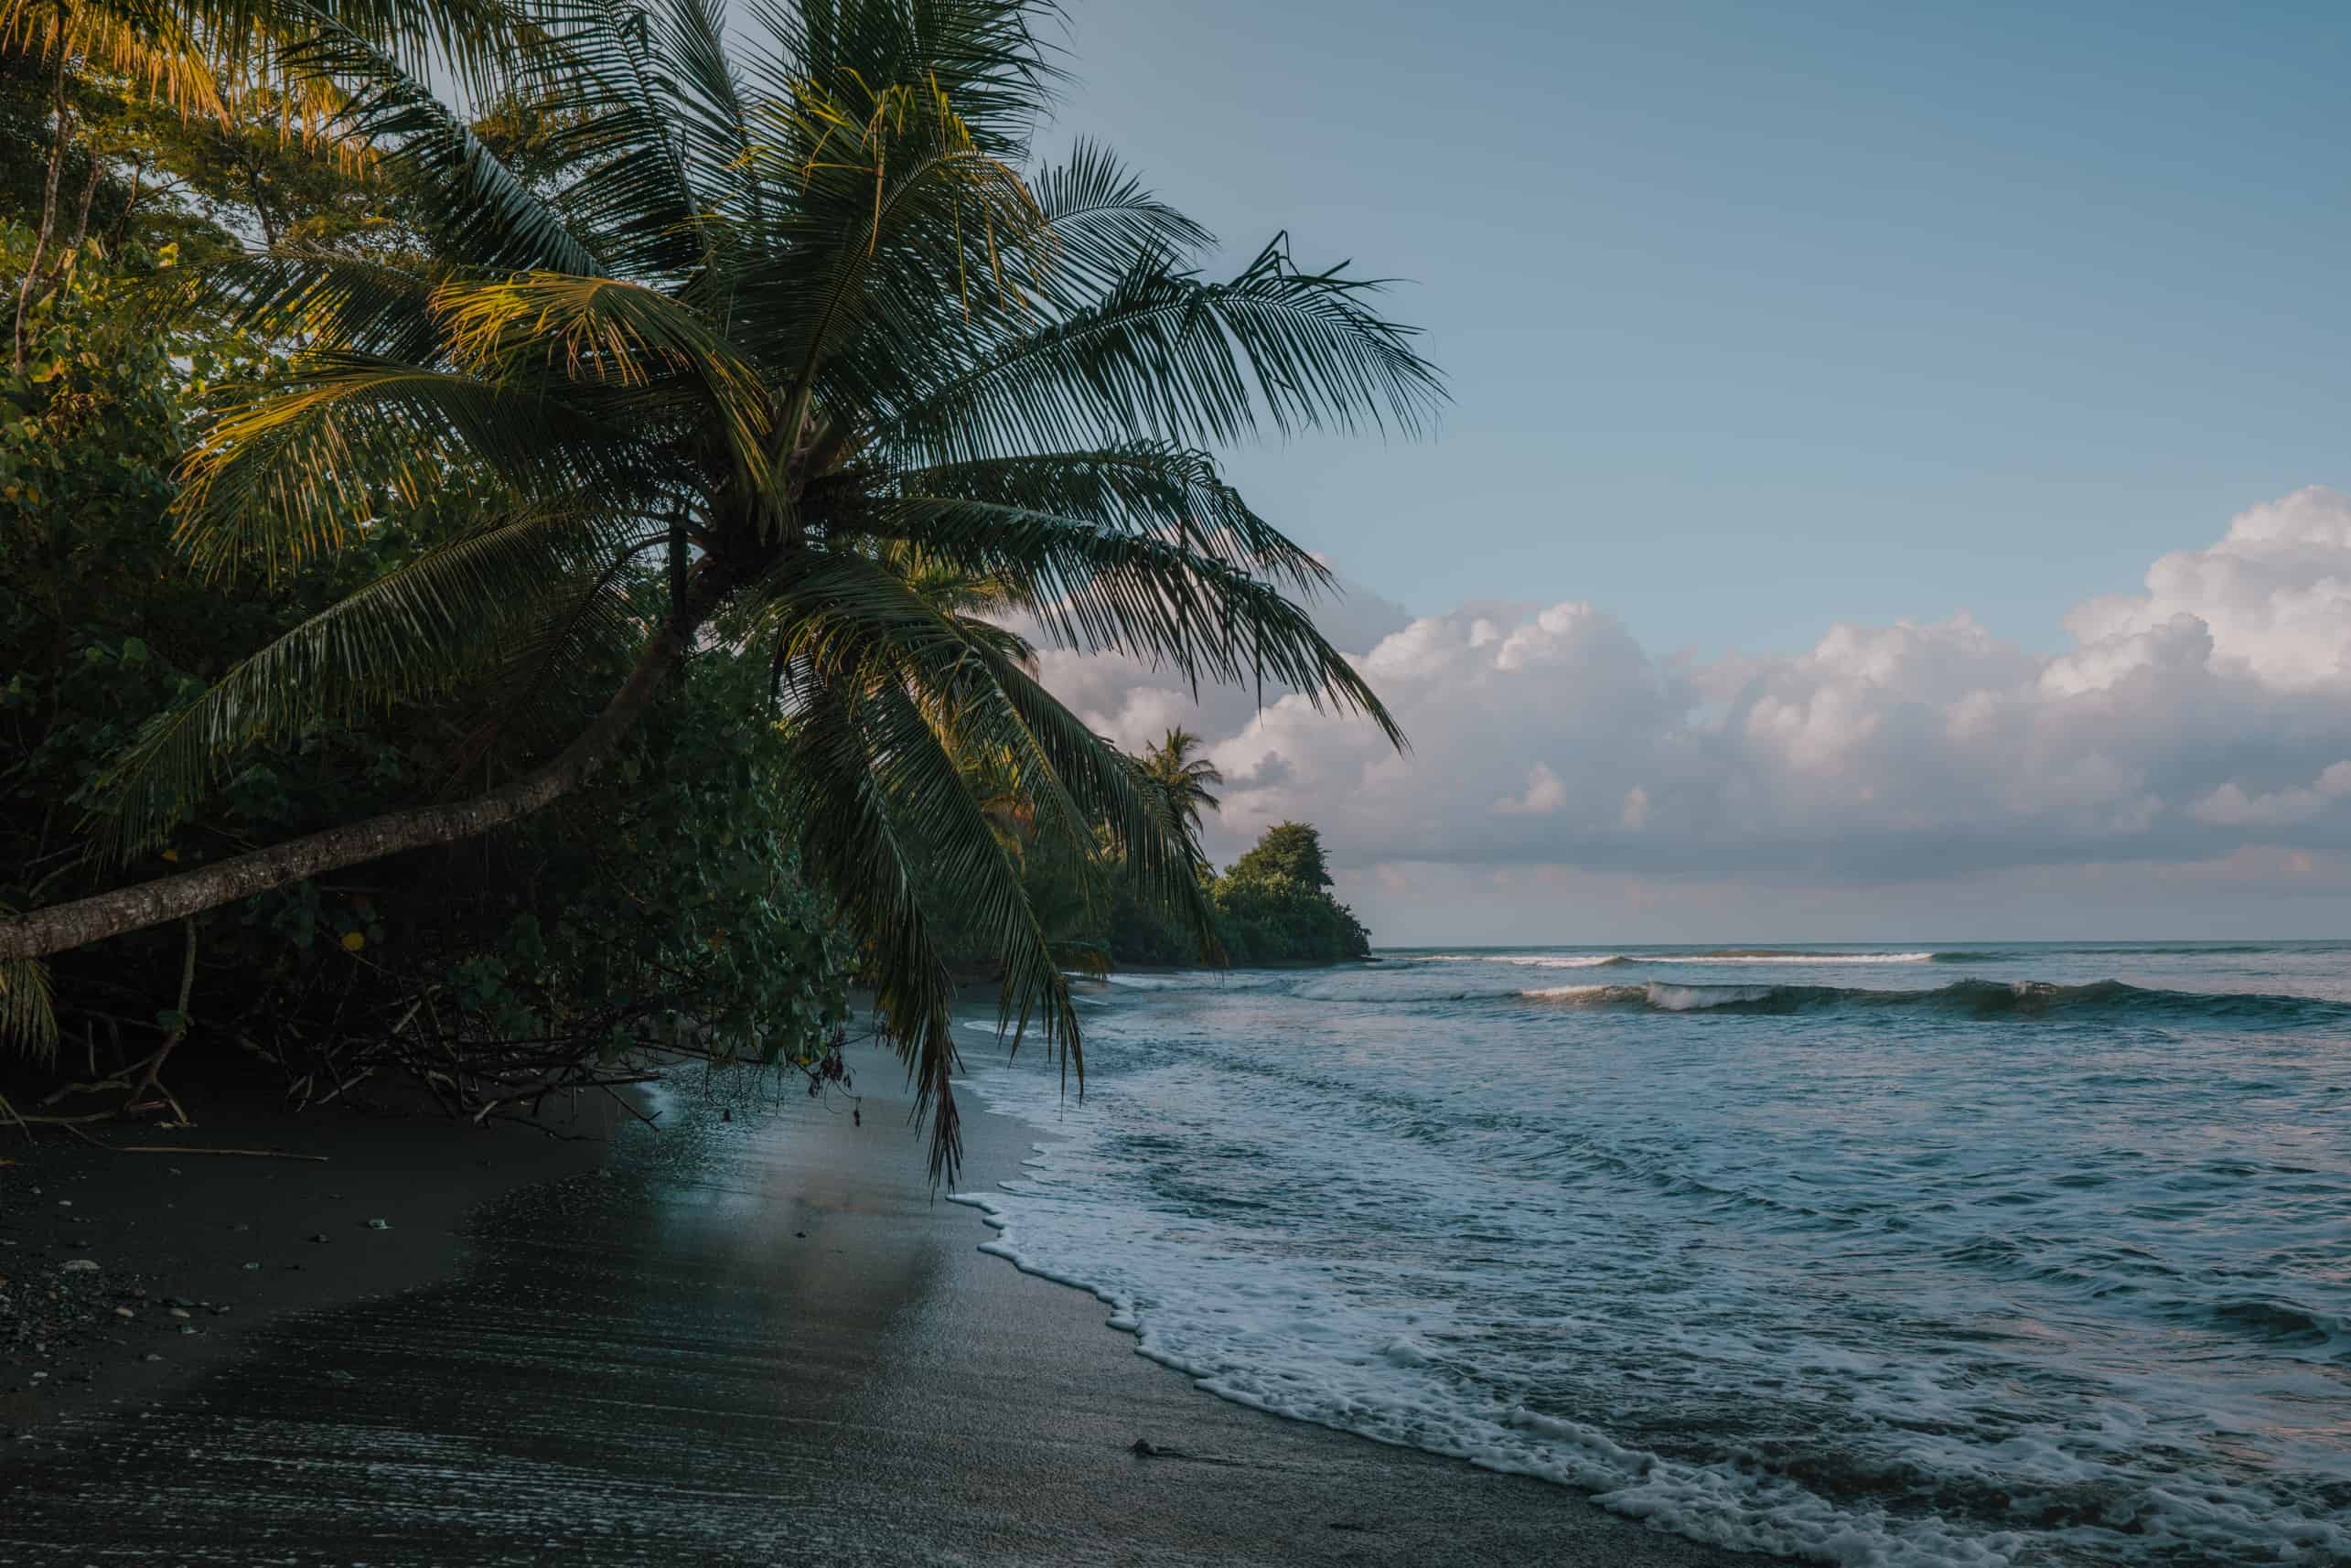 A black sand beach with palm trees and waves located in Drake Bay, Costa Rica near Corcovado National Park.